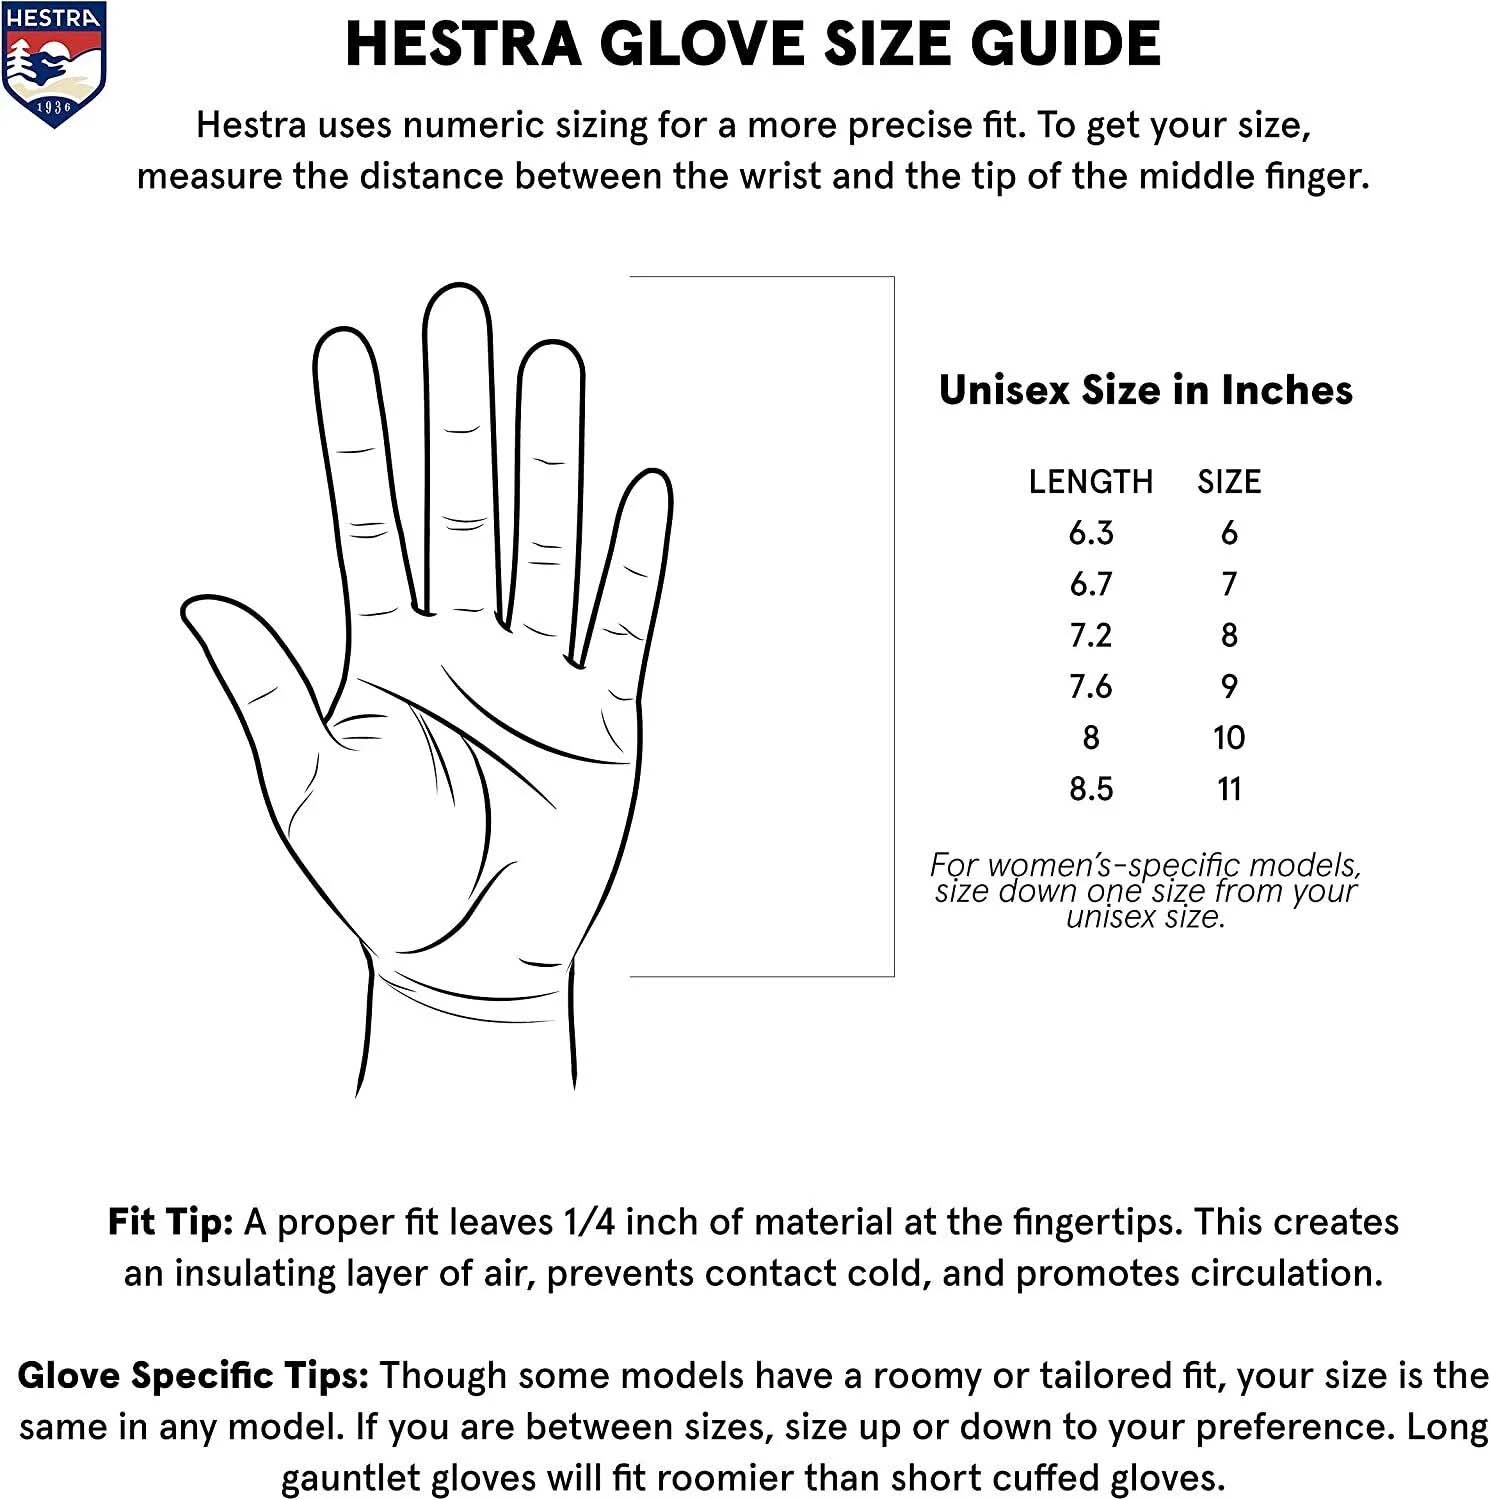 Hestra Glove Size Guide